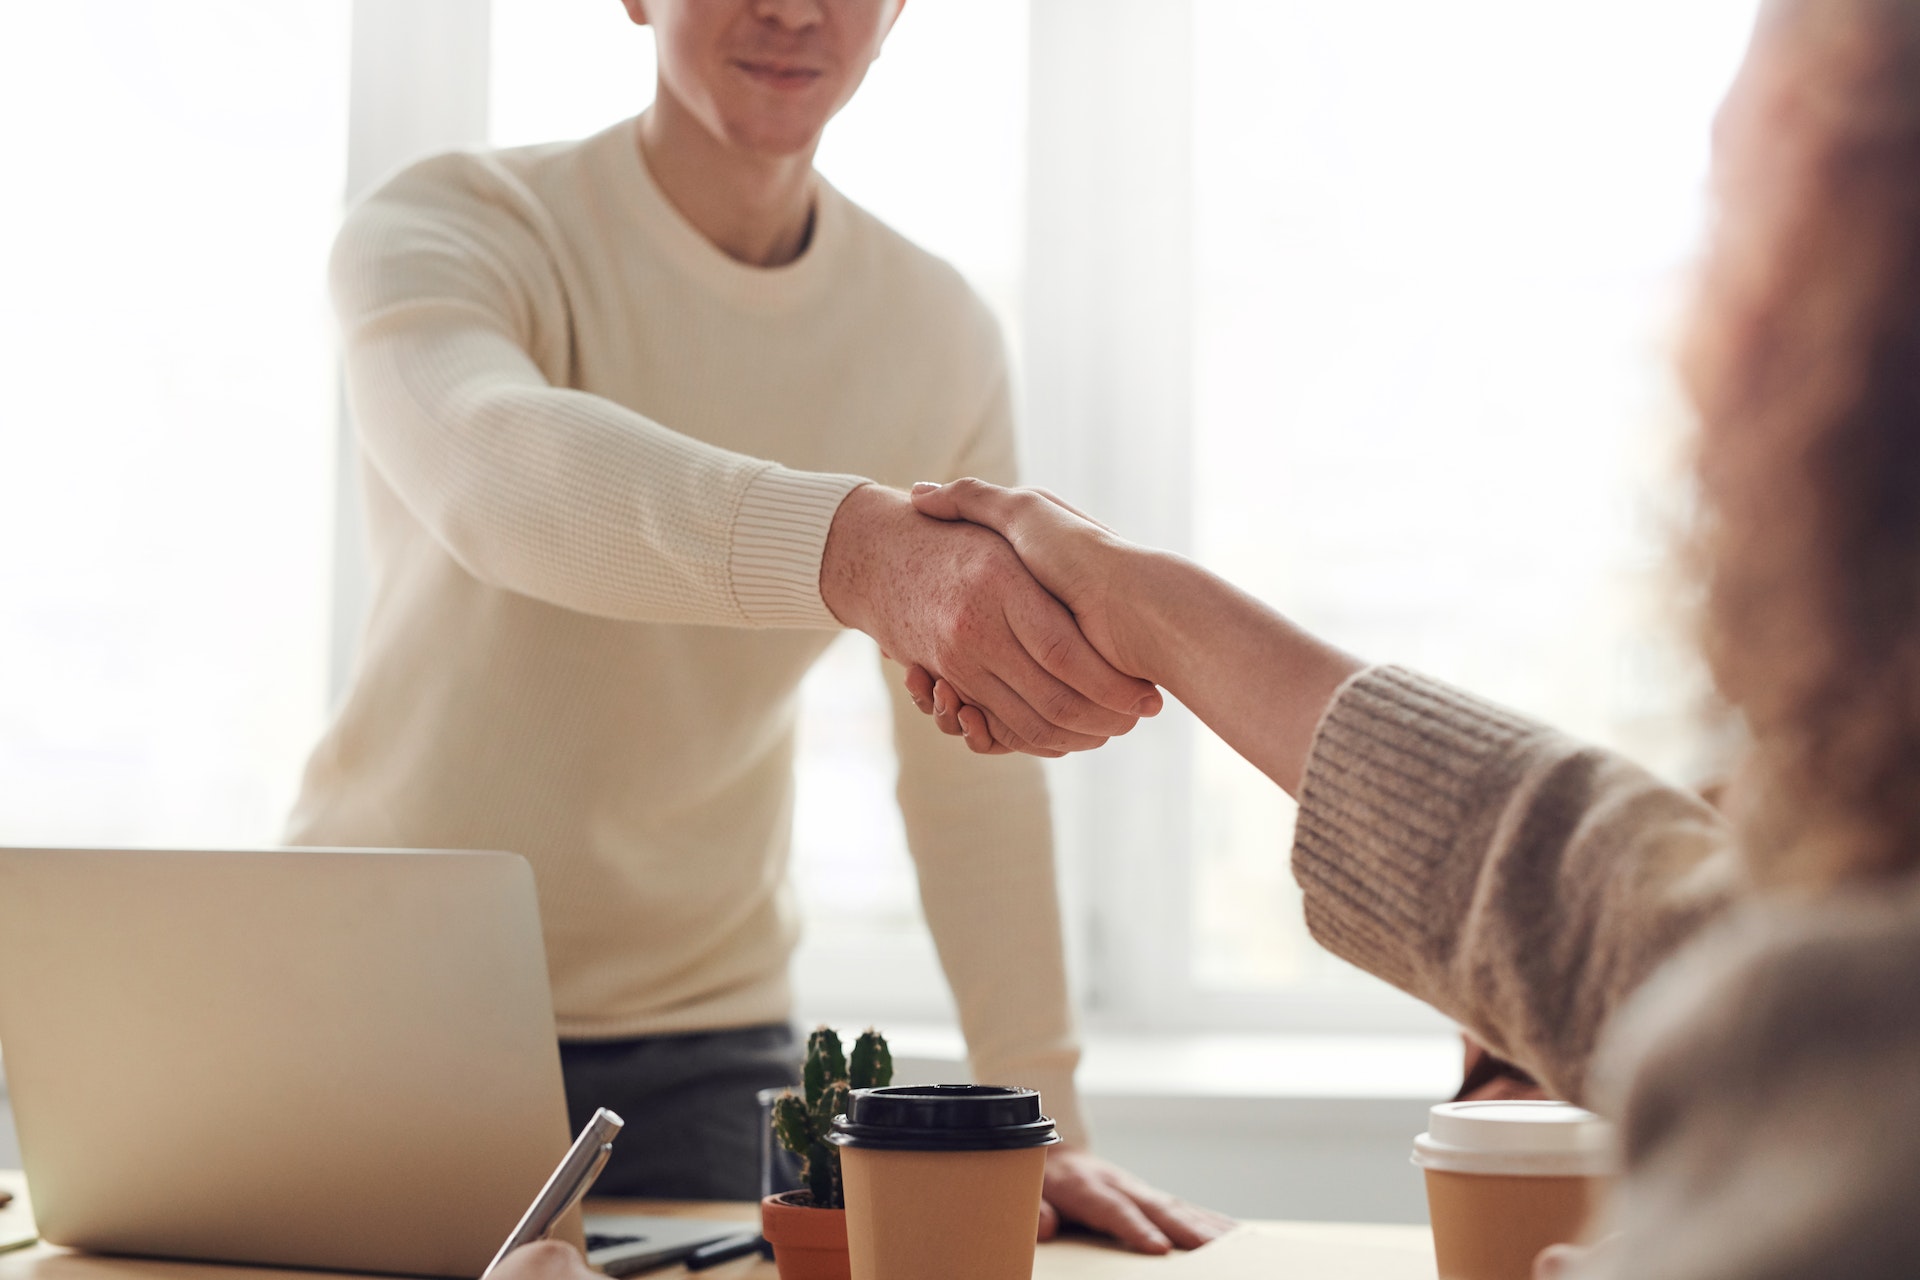 A man shaking hands with a woman in an office | Source: Pexels